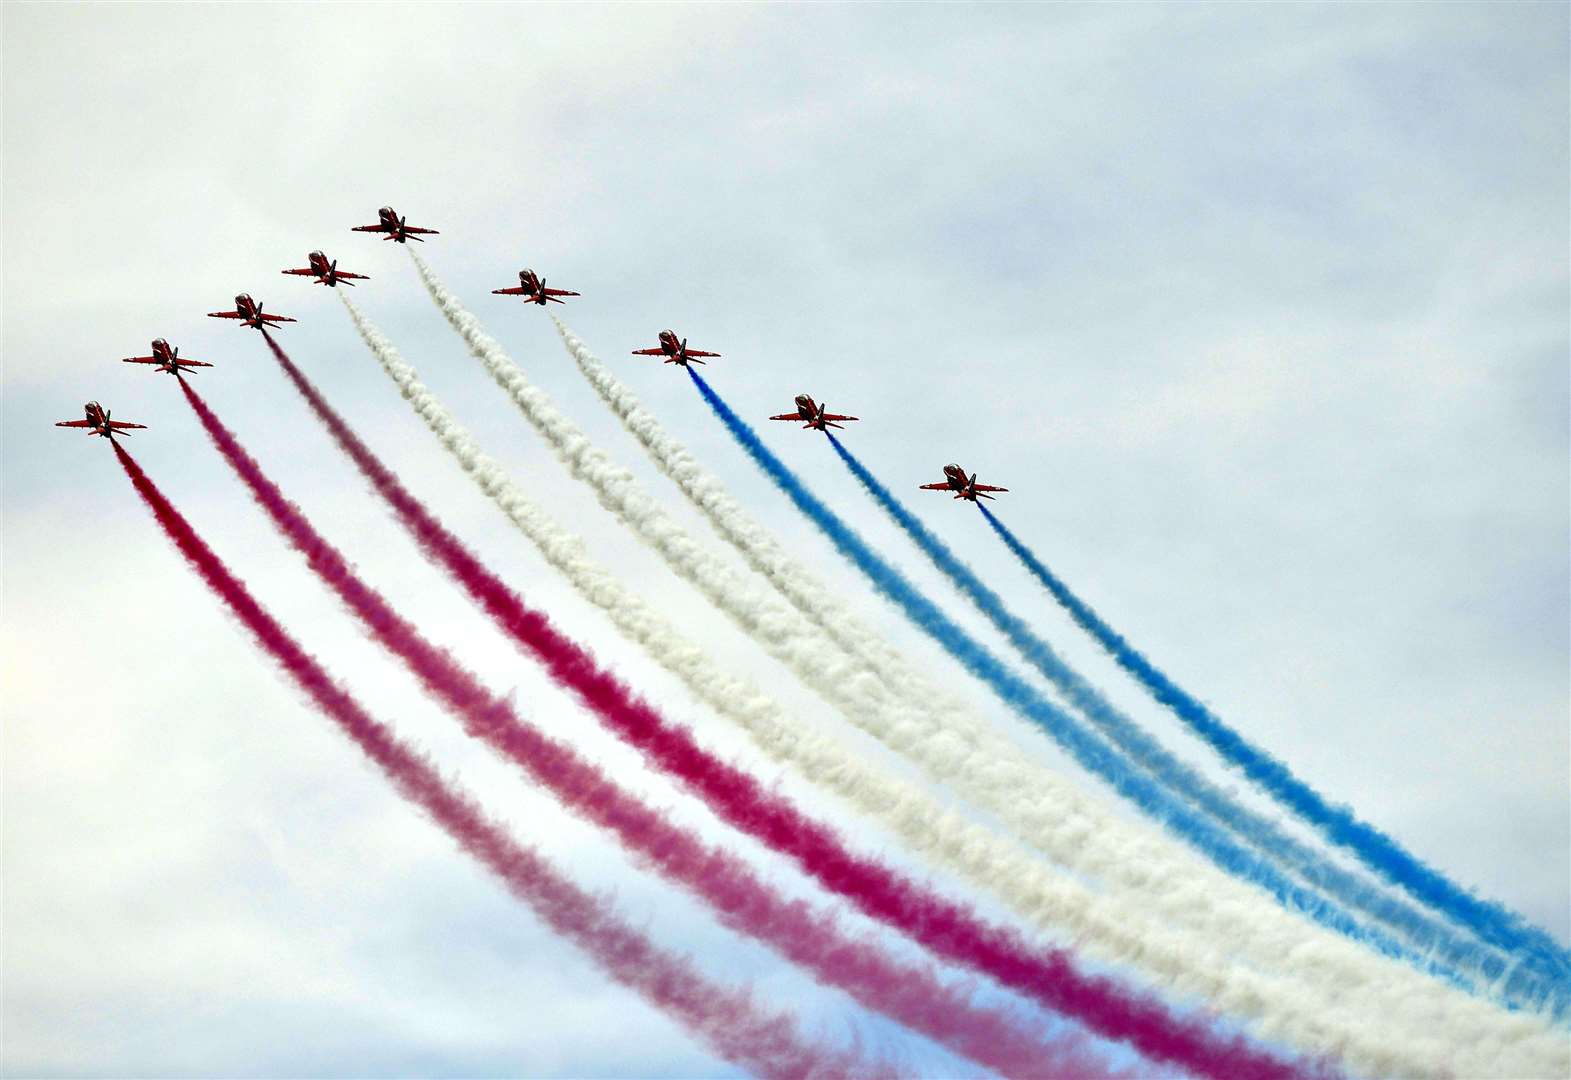 Red Arrows at the Folkestone Airshow in 2014